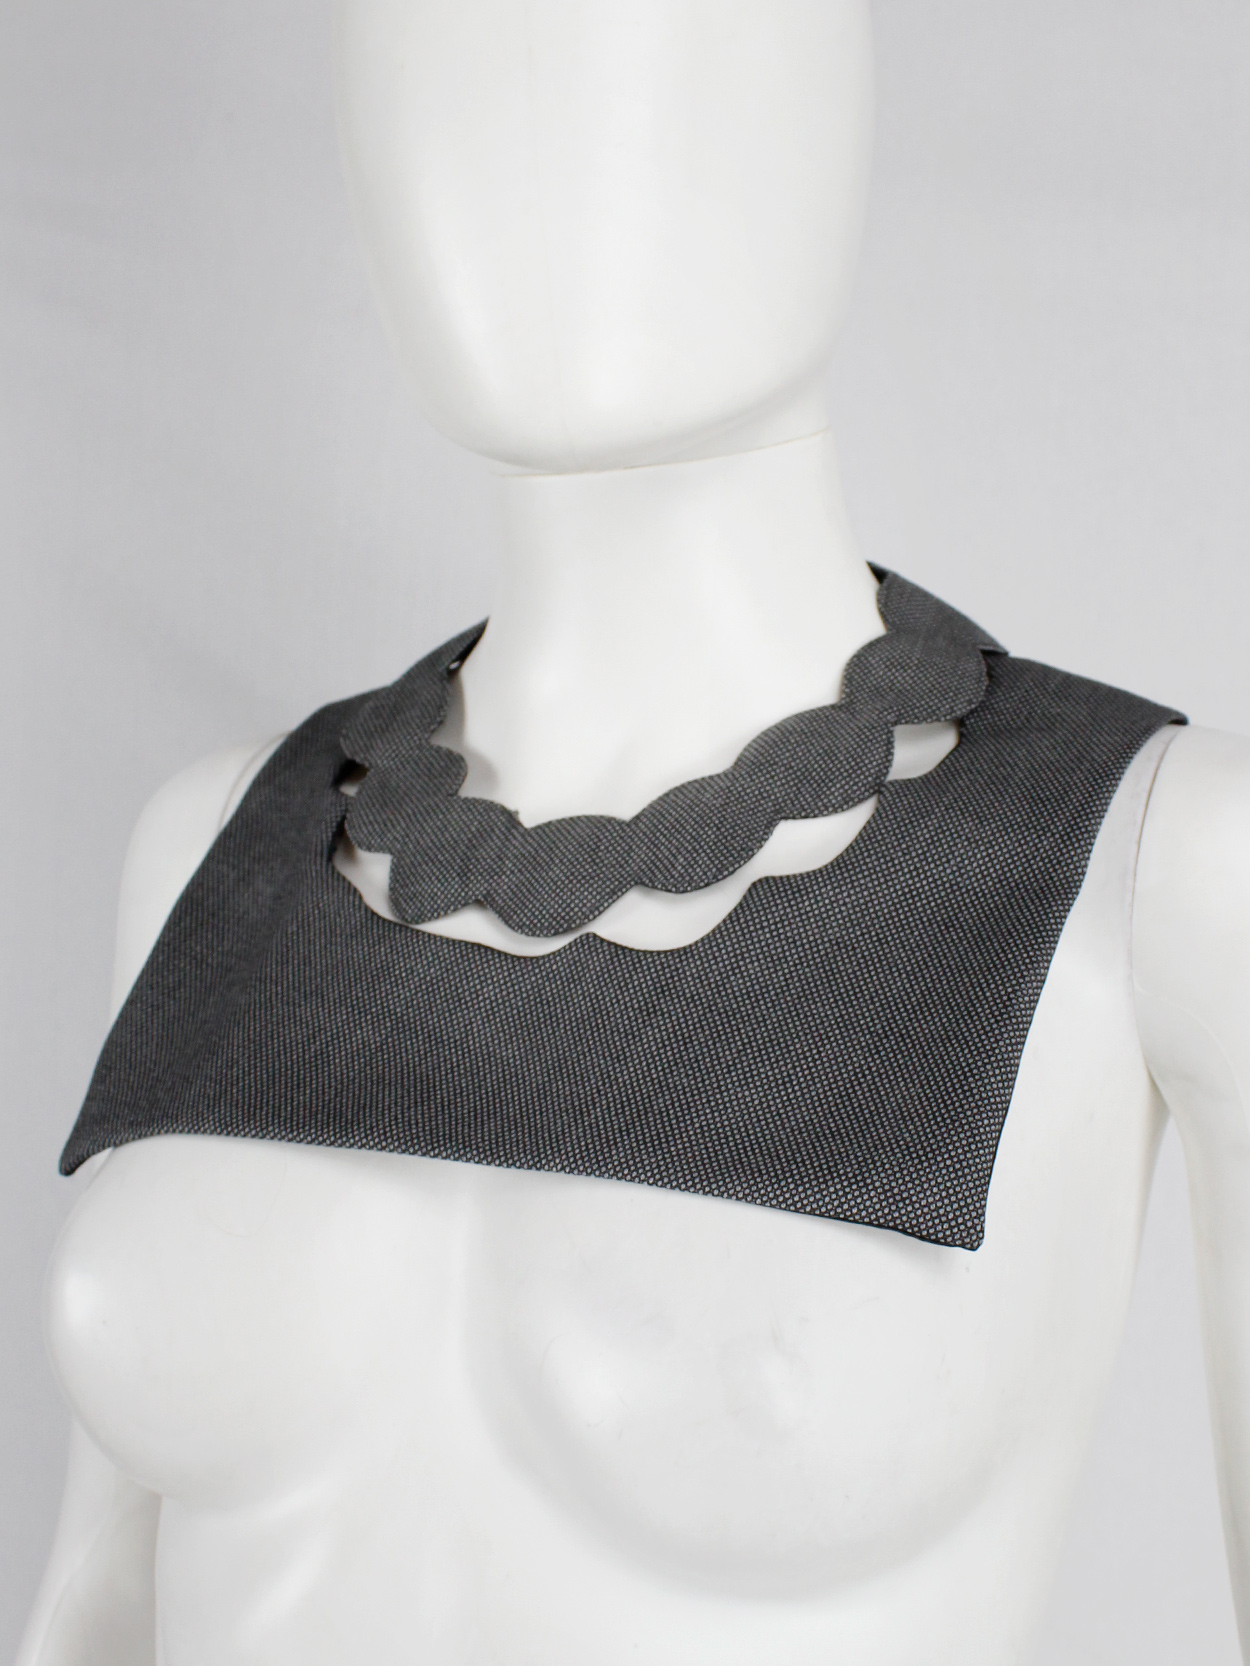 Maison Martin Margiela grey fabric square with cut out pearl necklace — fall 2005 (7)